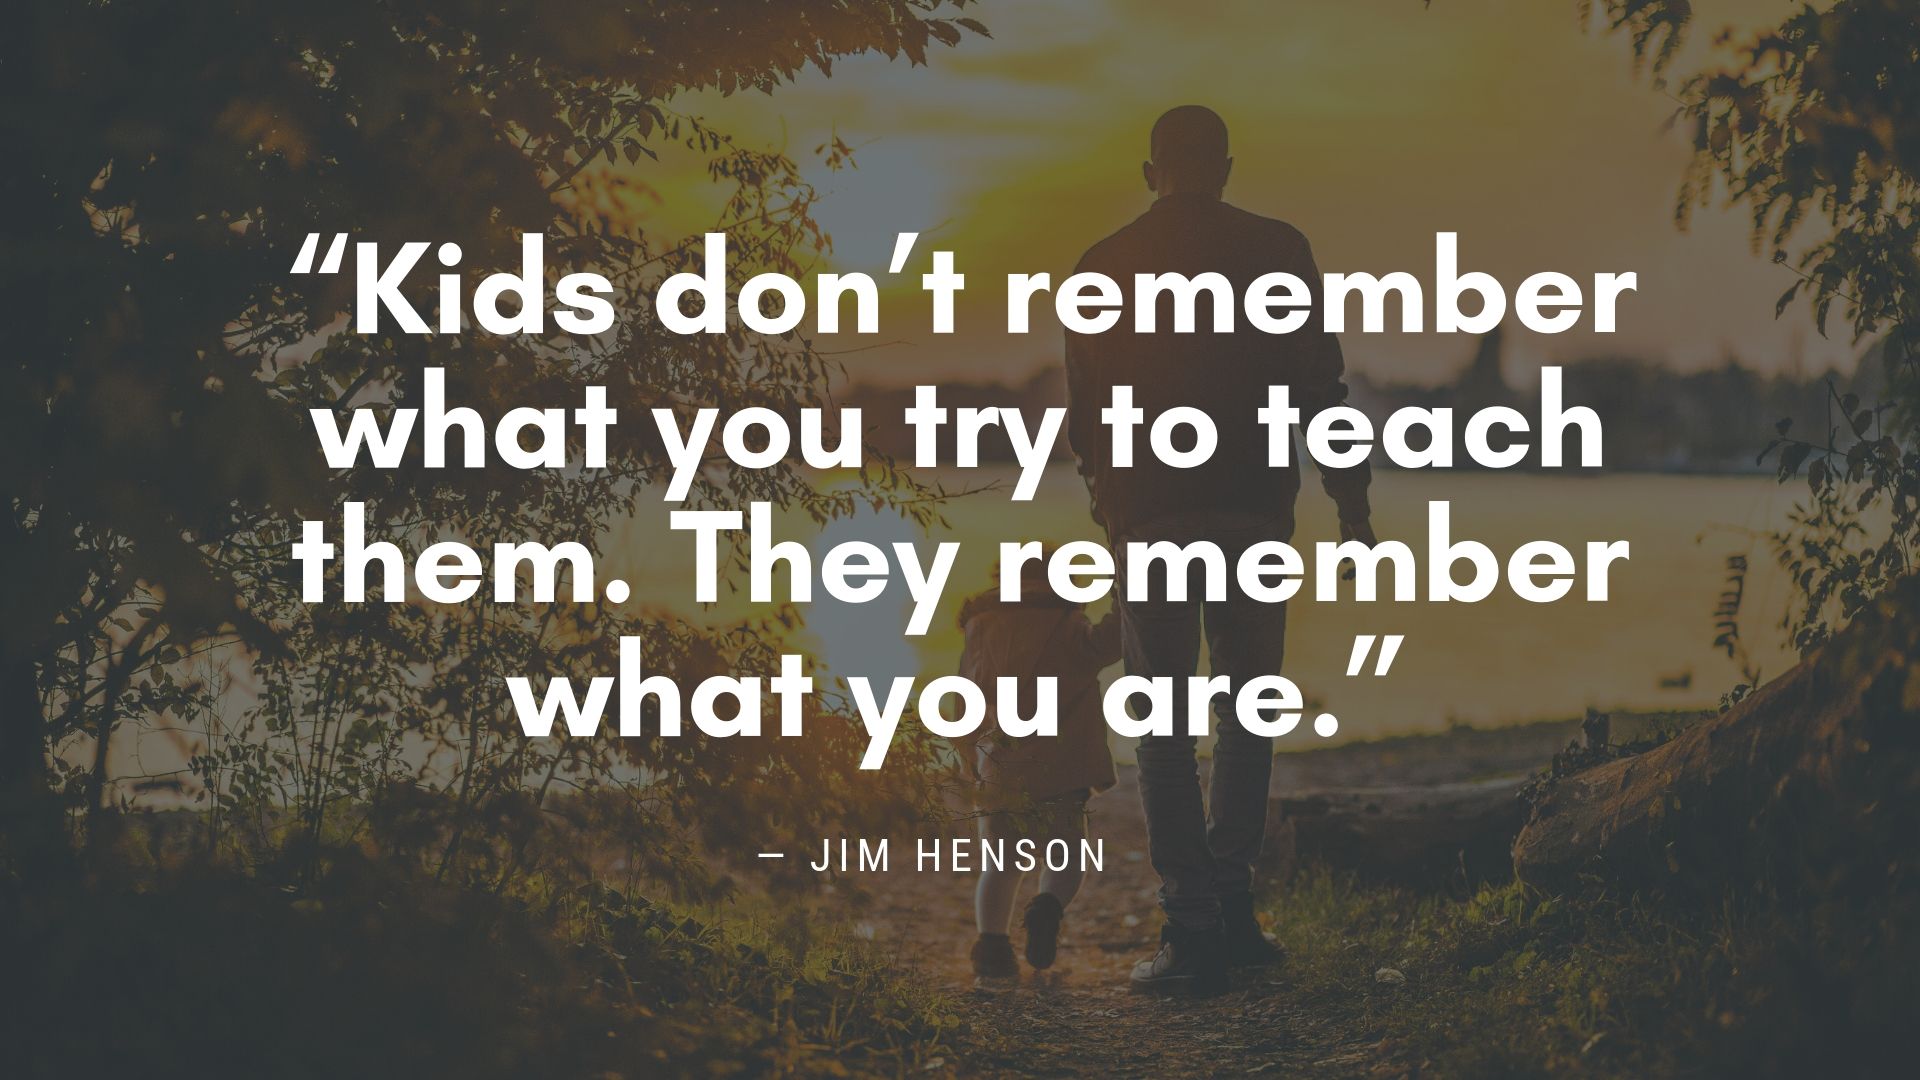 “Kids don’t remember what you try to teach them. They remember what you are.” ― Jim Henson